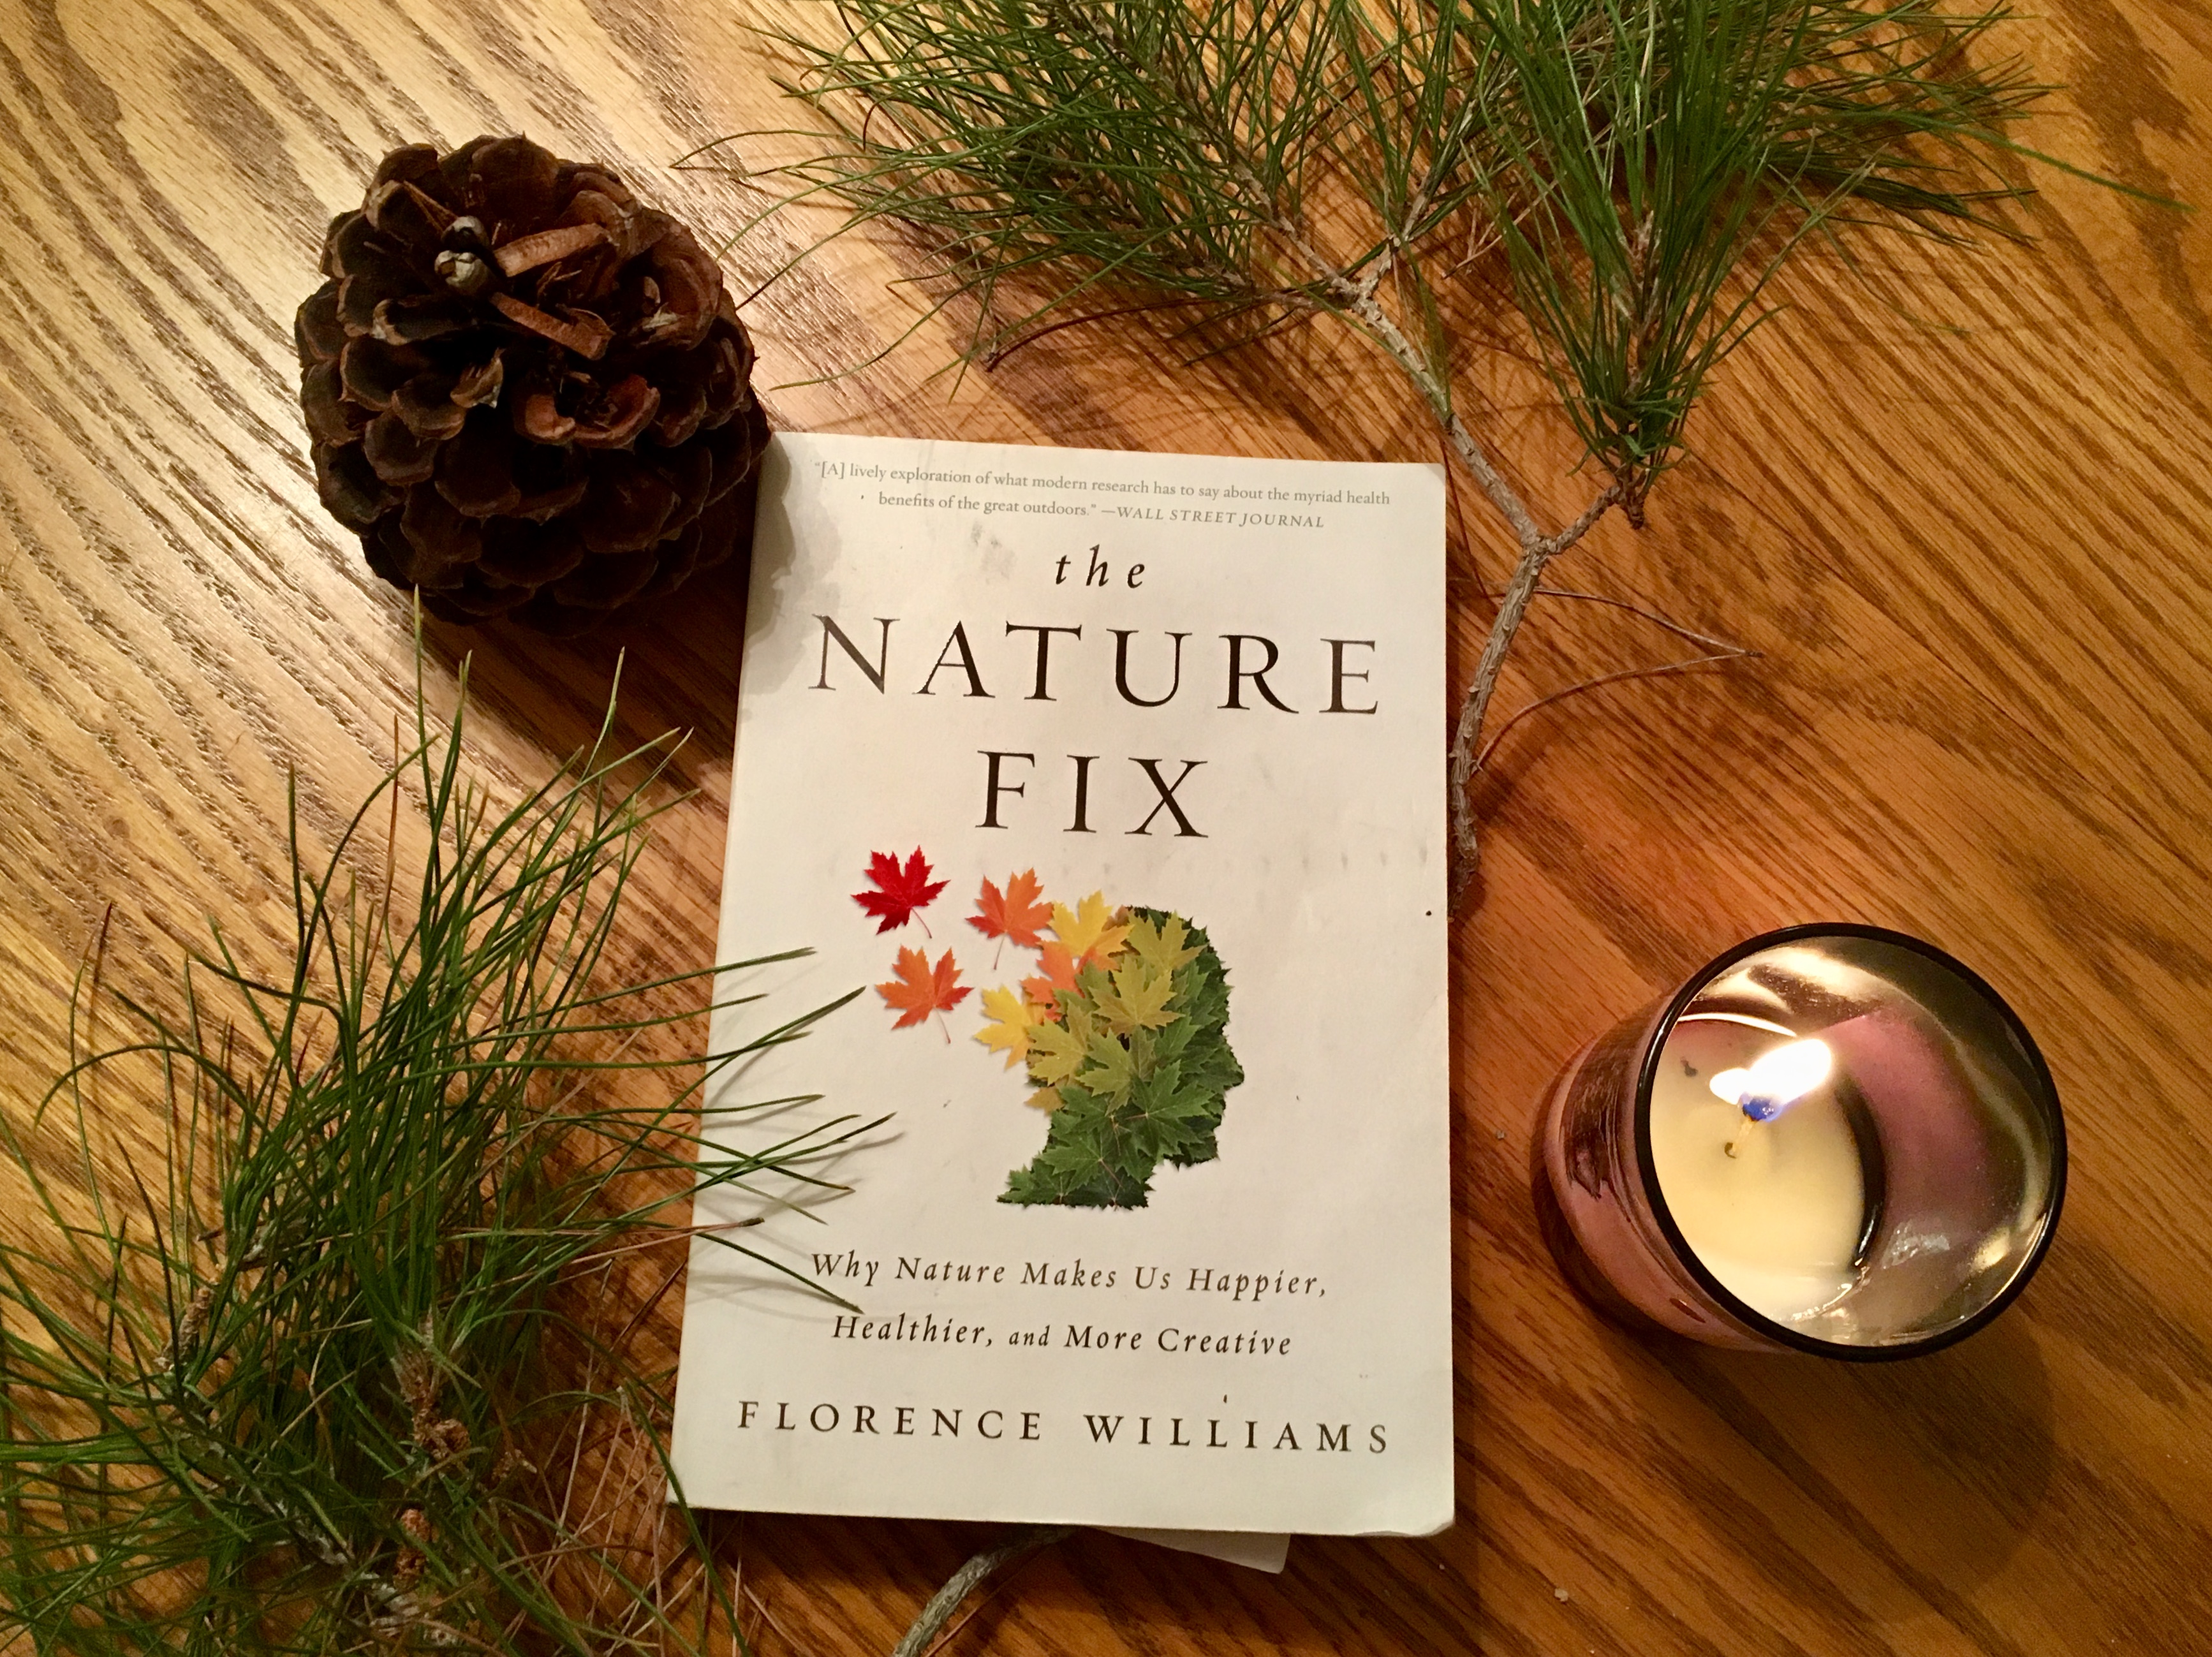 The Nature Fix paperback sitting on wood table next to pine needles, a pine cone, and a candle